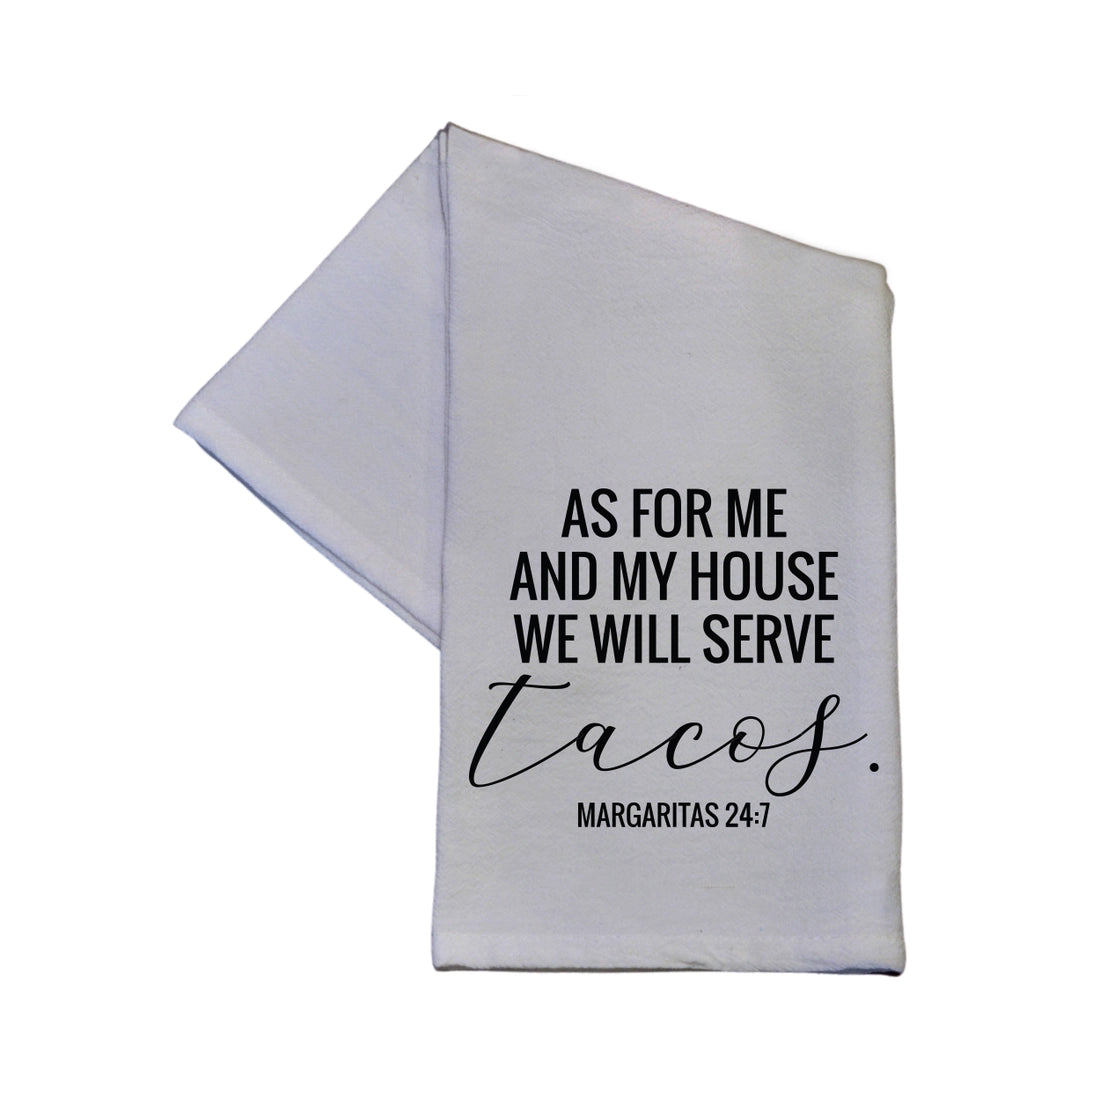 As For Me and My House We Will Serve Tacos Hand Towel